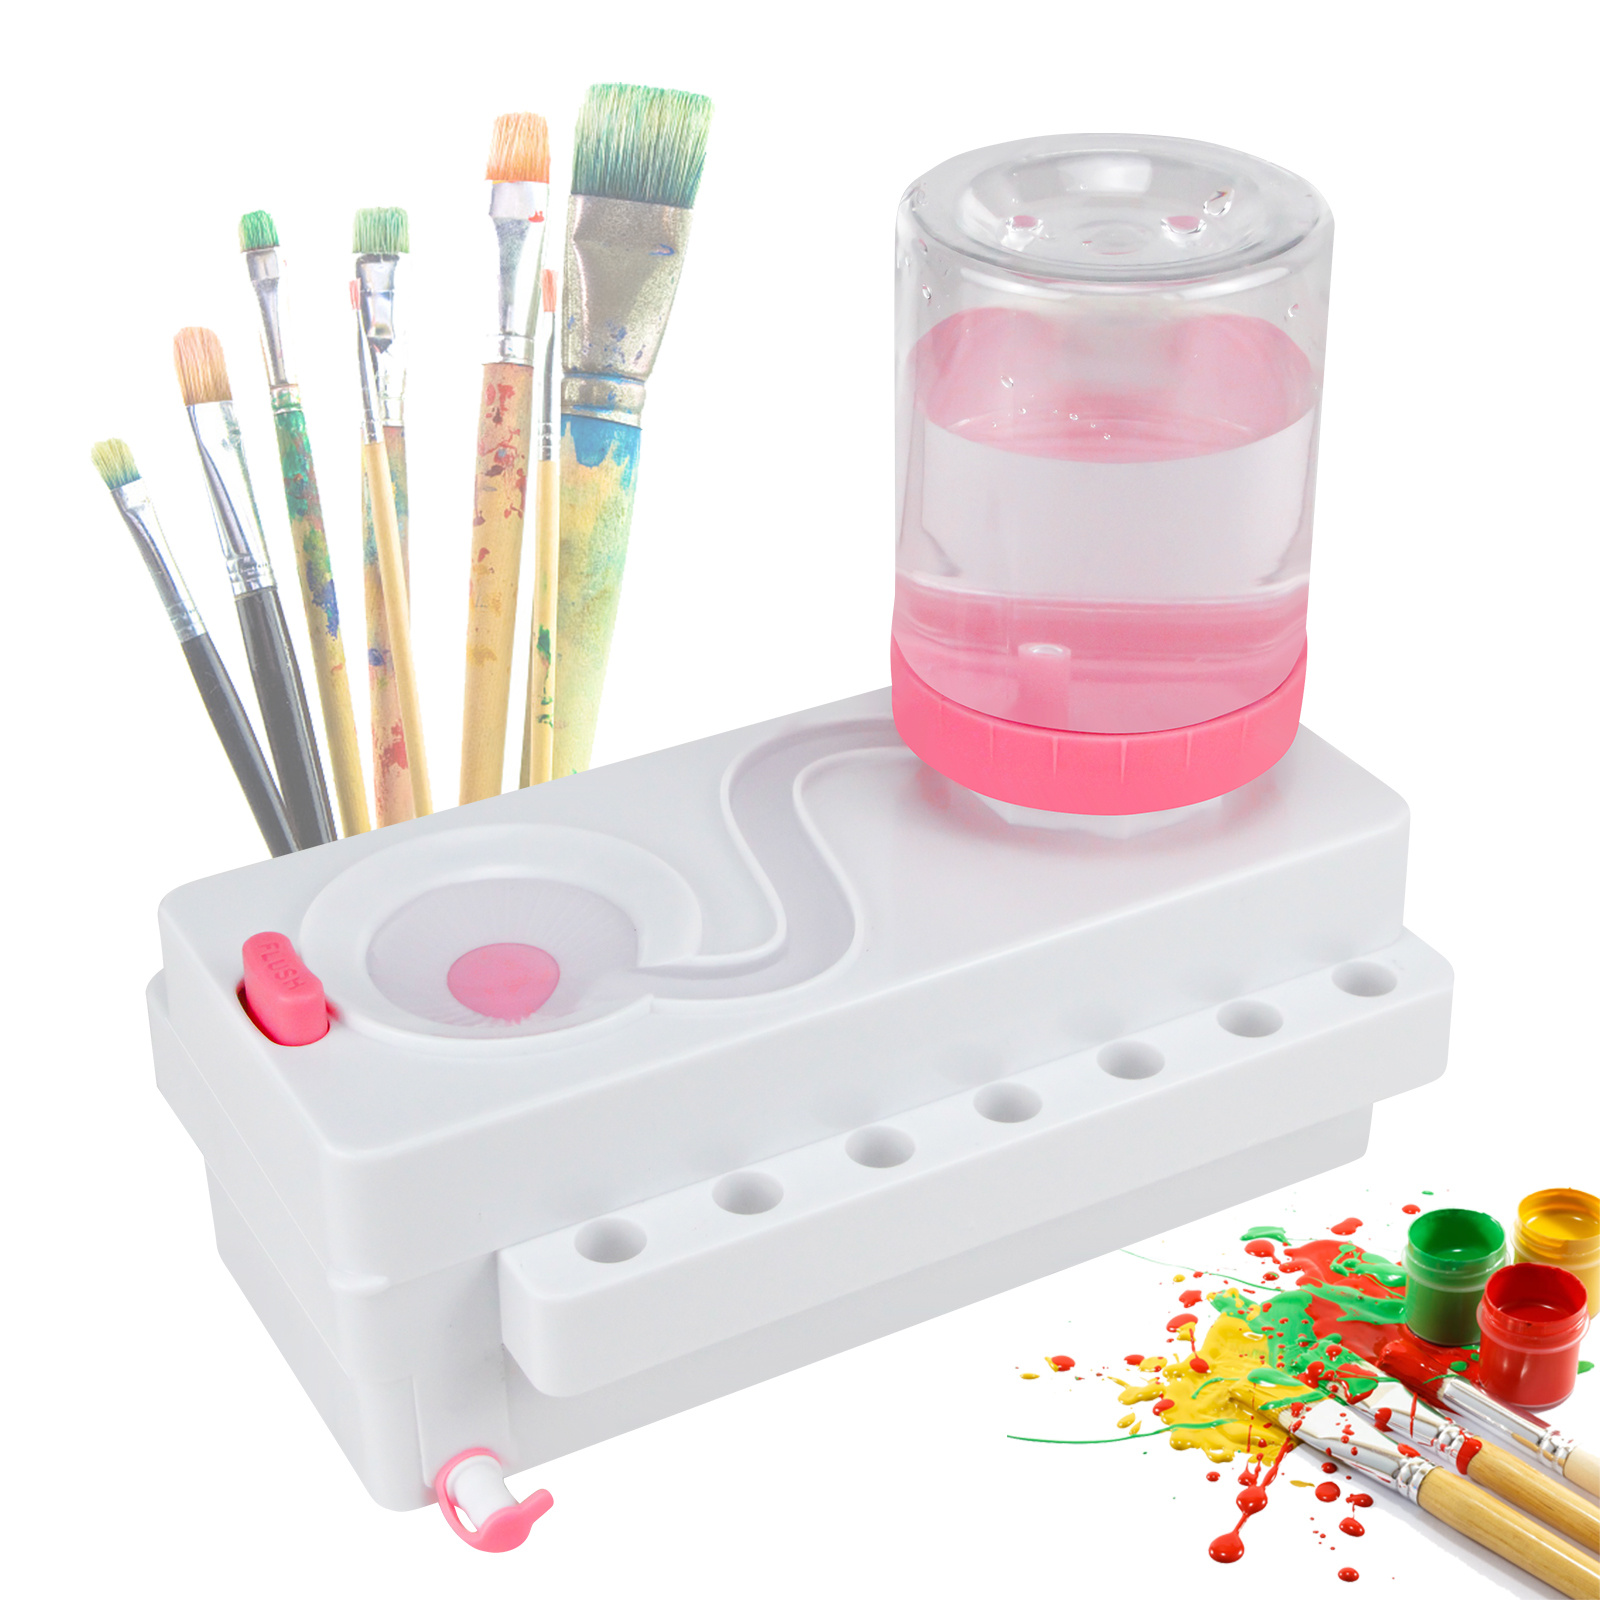 Brush Rinser Set Electric Cleaner Machine For Paint Brush, Makeup Brush,  Running Water Circulation Paint Brush Rinser, Art Supplies for Acrylic and